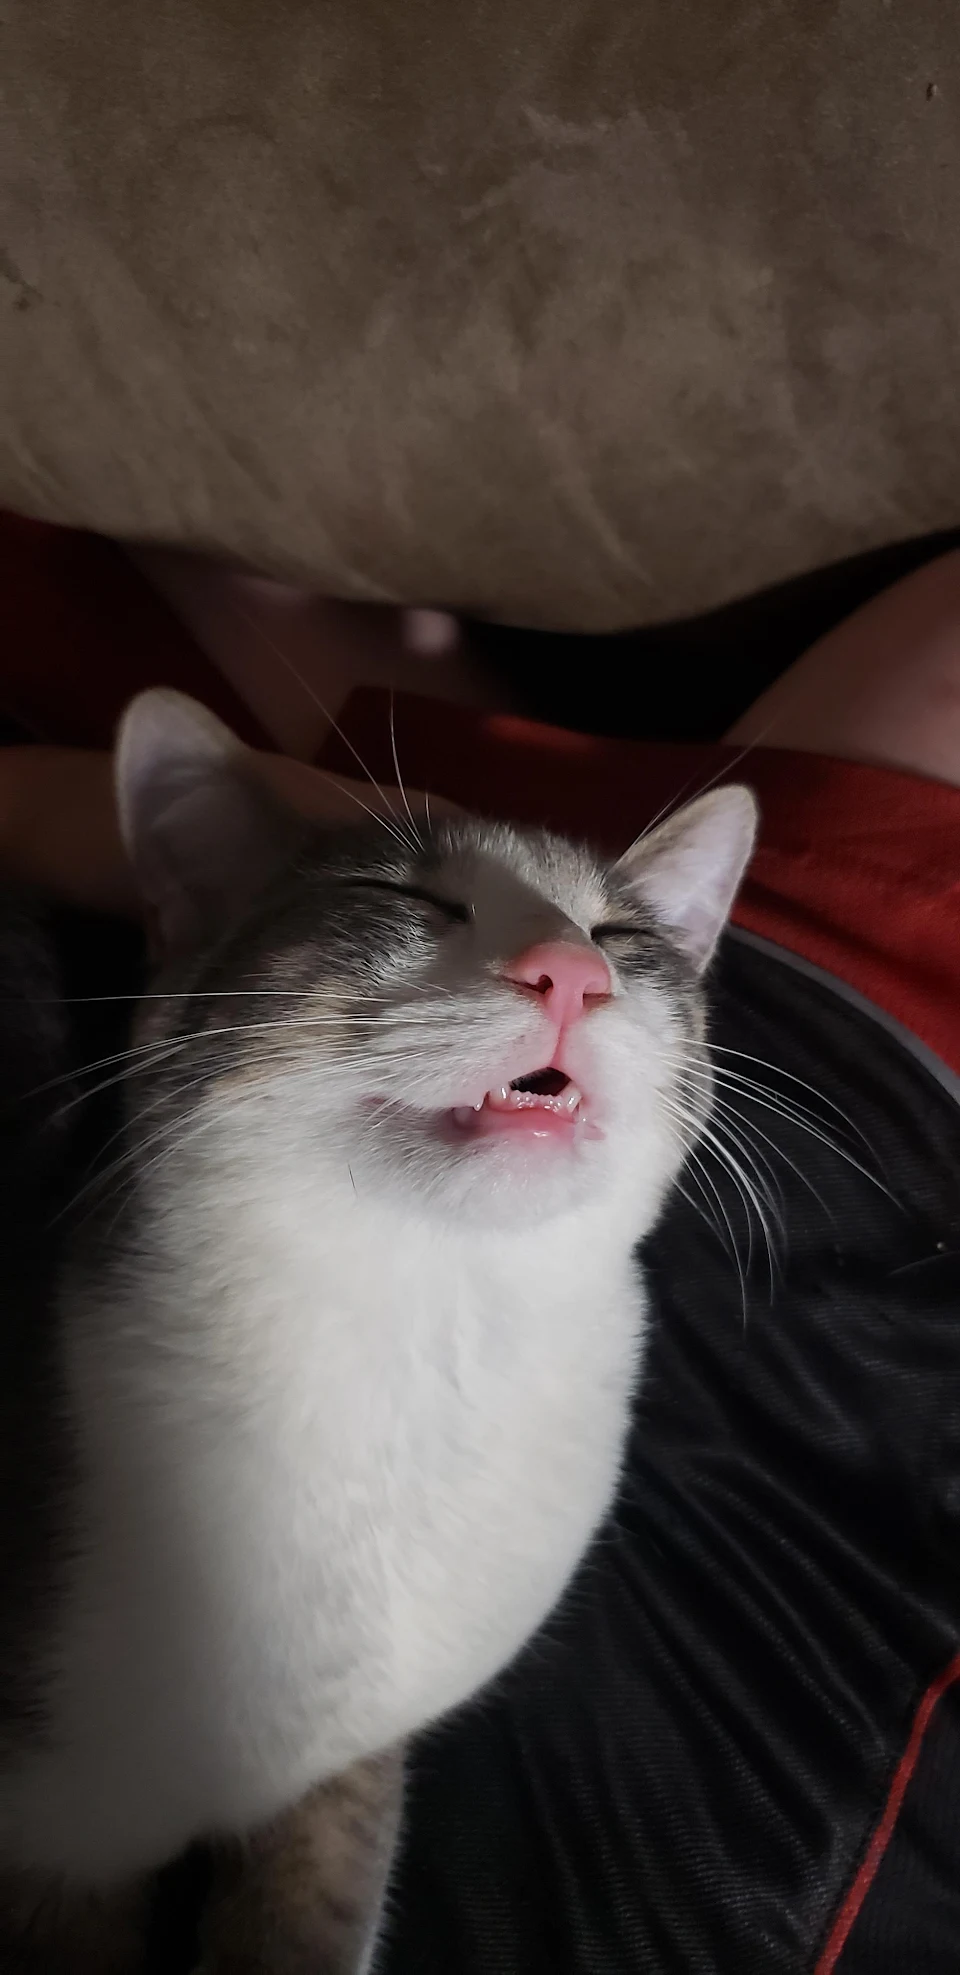 My cat's derp face when he's getting pets.